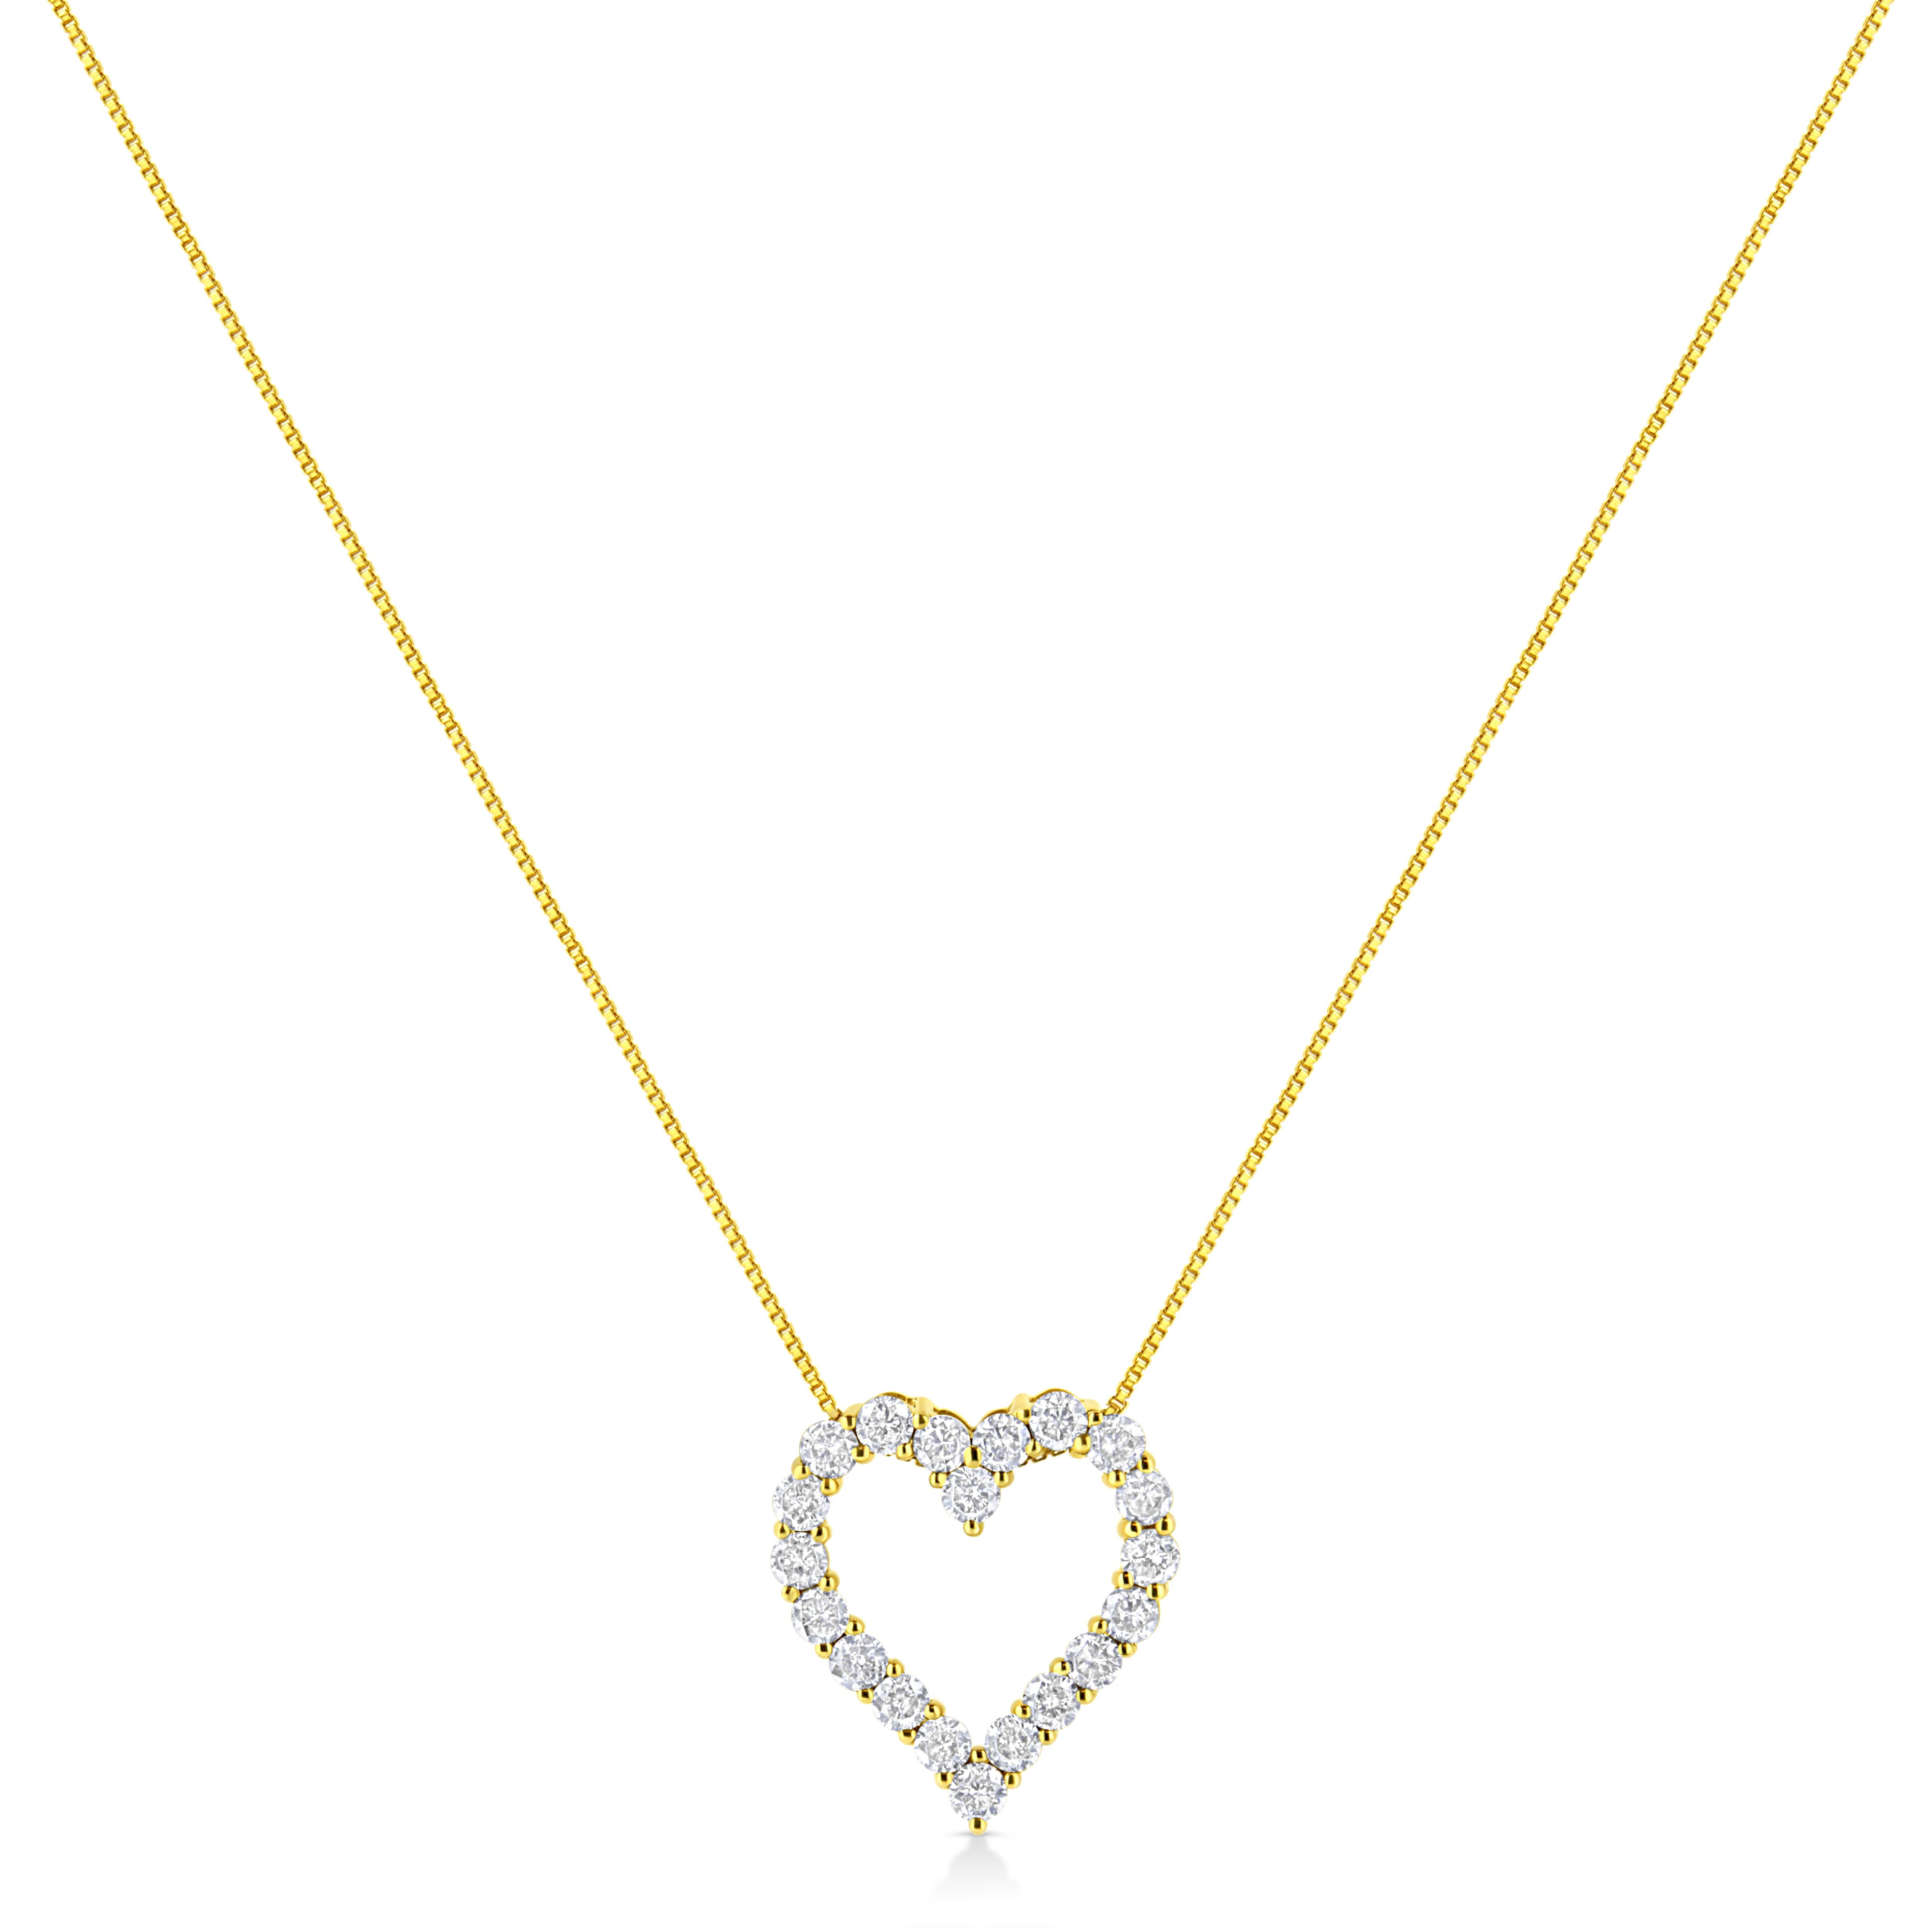 Celebrate someone you love with this stunning diamond open heart pendant necklace. This diamond necklace features a classic open heart made up of prong set round, brilliant cut diamonds set in genuine 14K Yellow Gold Plated Sterling Silver. The